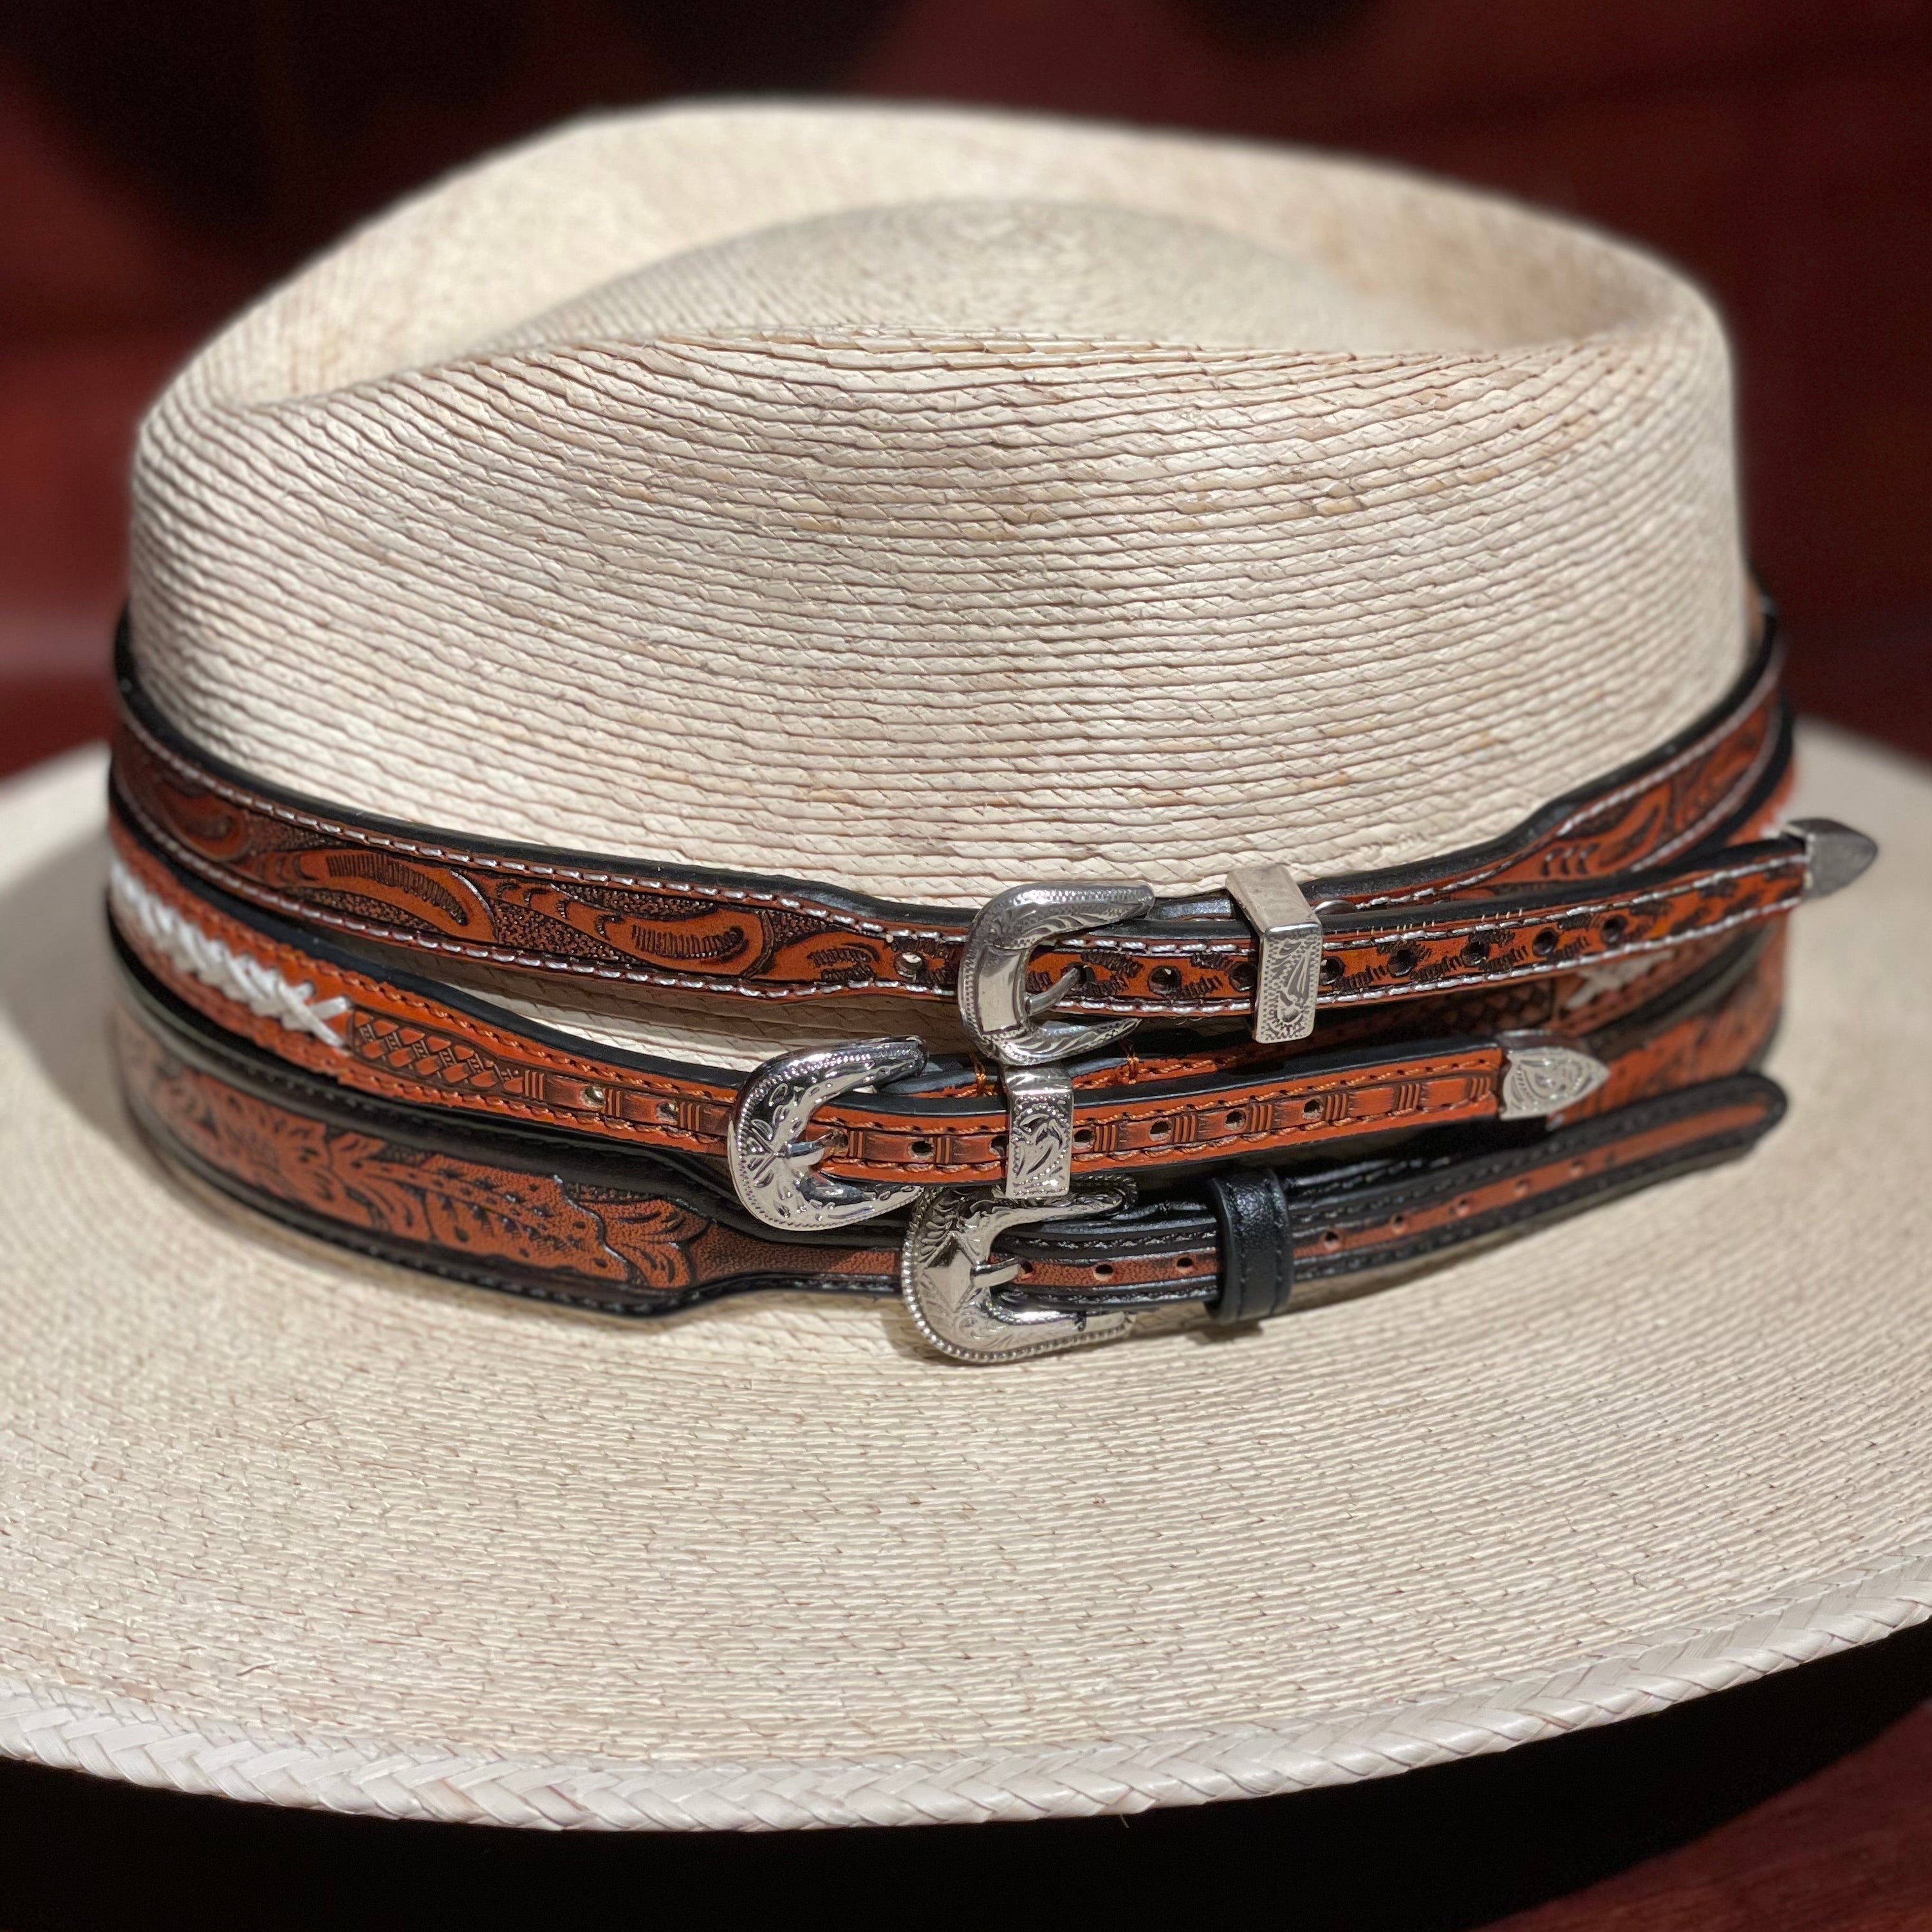 Hat Bands & Feathers – Brisbane Hatters